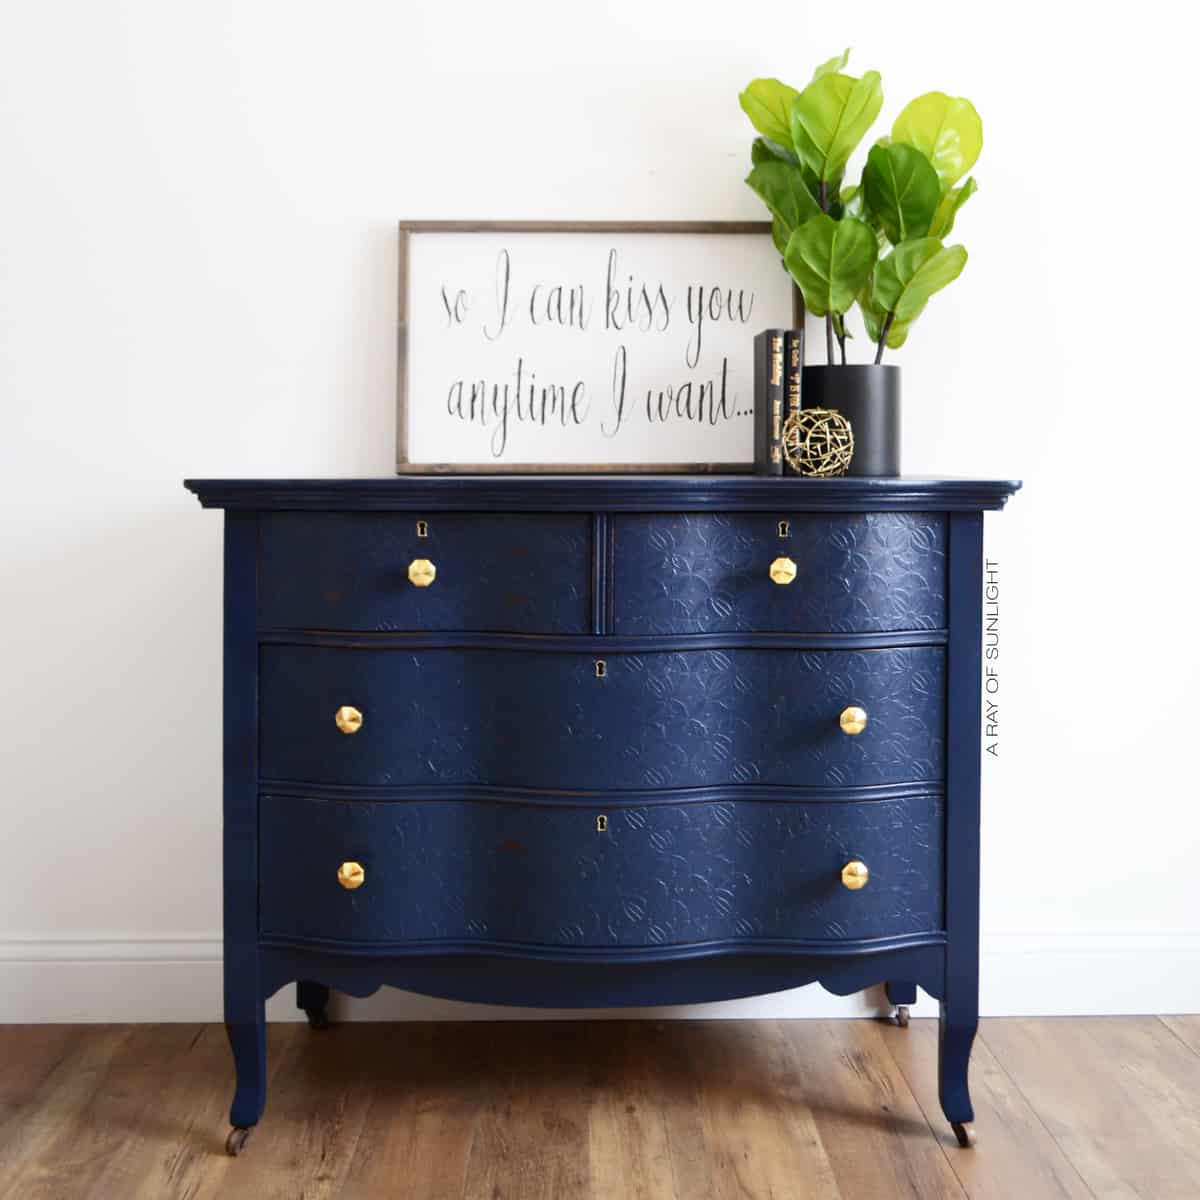 The Peacoat Dresser with Textured Drawers #DIY #furniturepaint #paintedfurniture #chalkpaint #textured #navy #dresser #serpentine #stencil #blue #countrychicpaint - blog.countrychicpaint.com